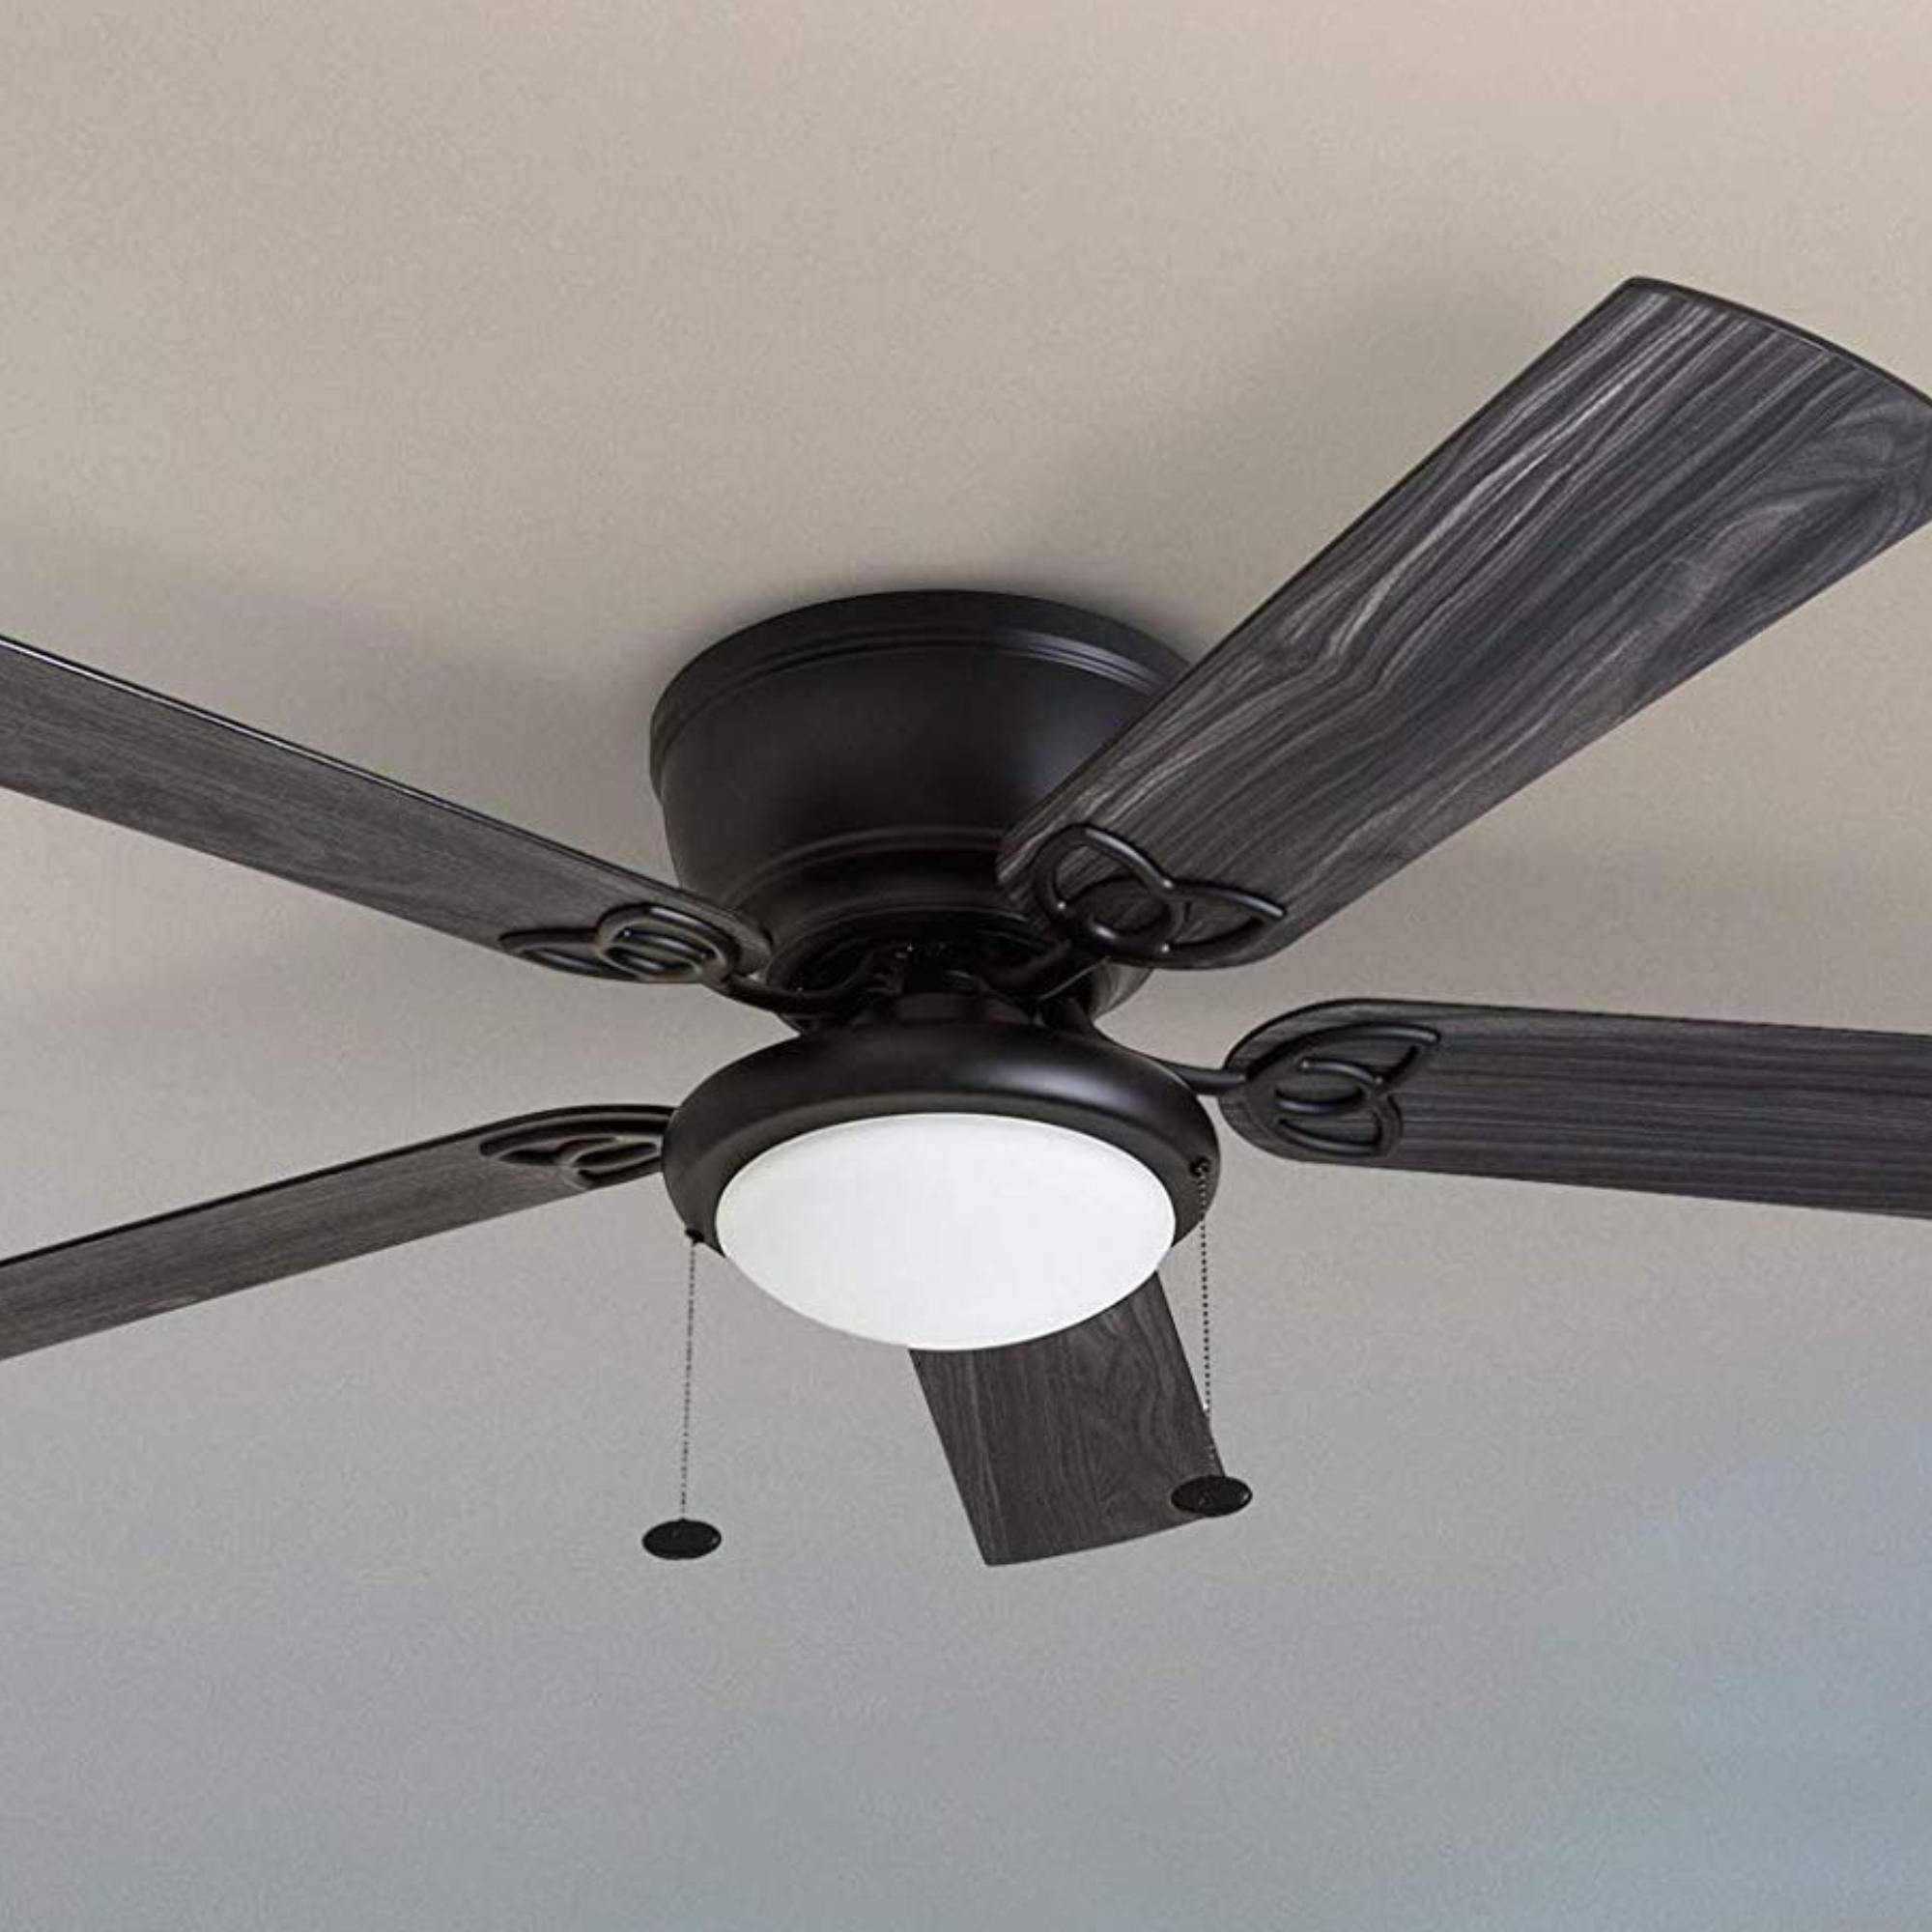 52 Inch Benton, Matte Black, Pull Chain, Ceiling Fan by Prominence Home